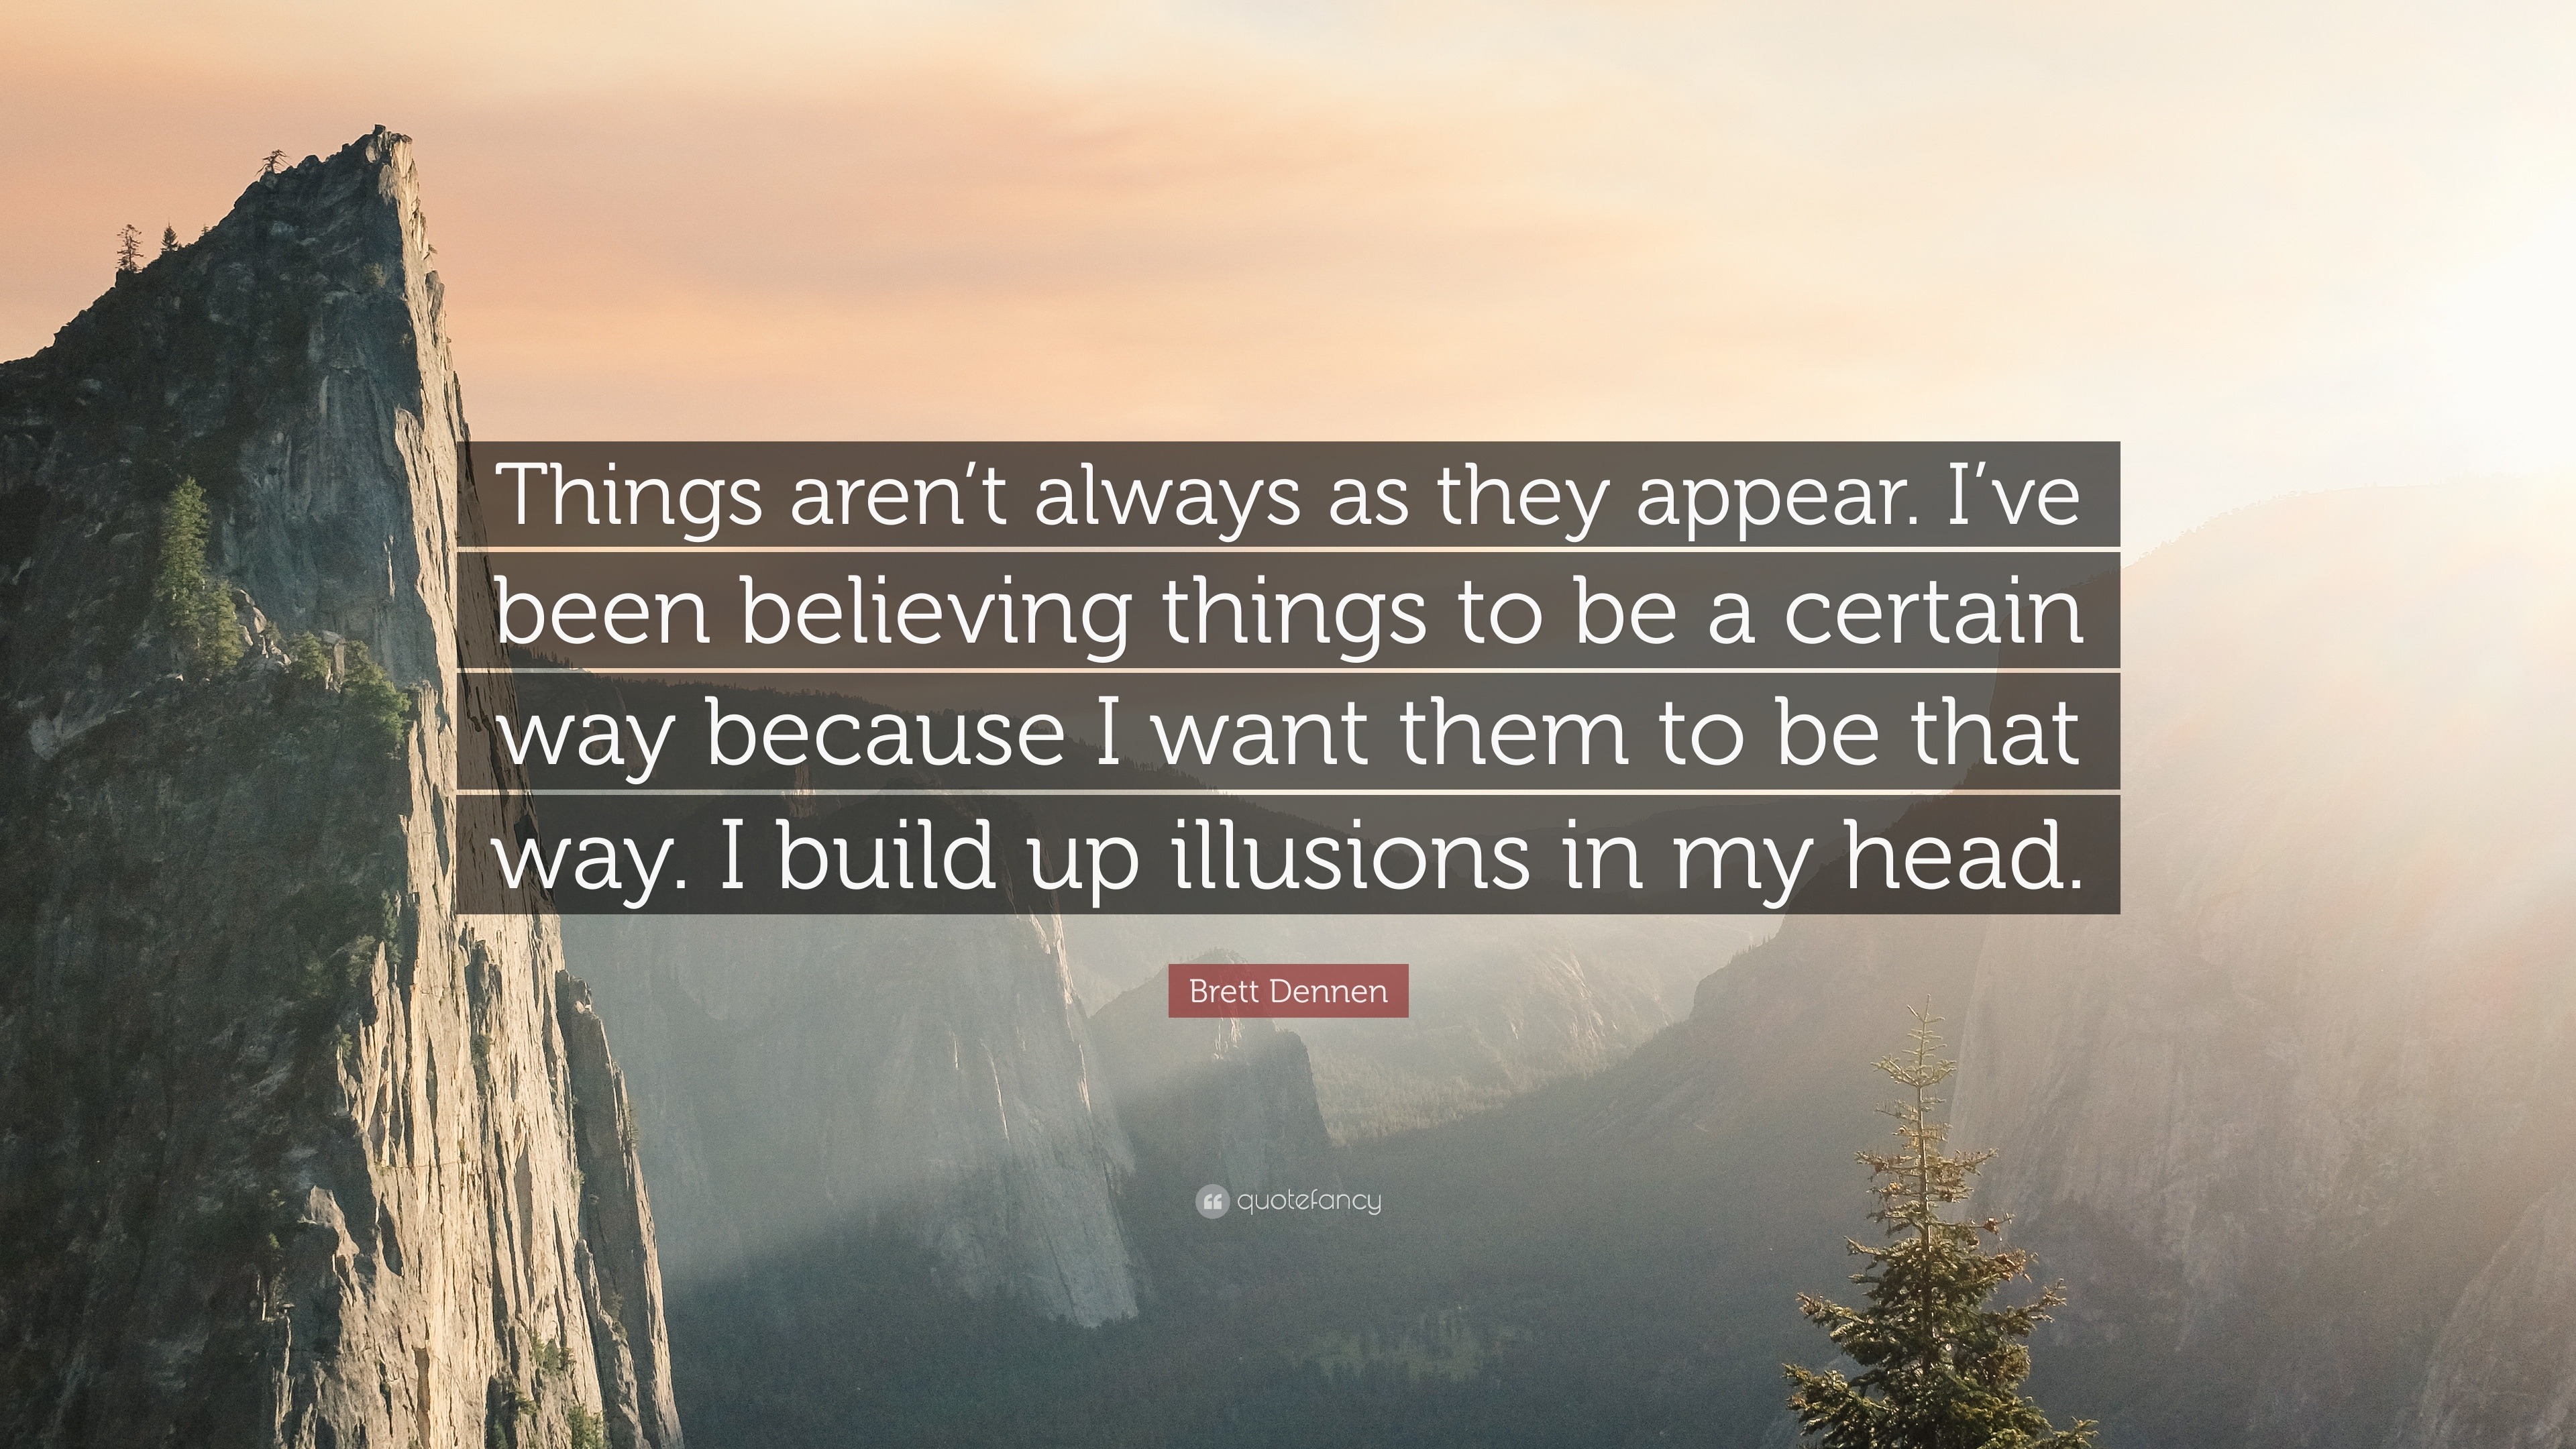 Brett Dennen Quote Things Aren T Always As They Appear I Ve Been Believing Things To Be A Certain Way Because I Want Them To Be That Way 7 Wallpapers Quotefancy